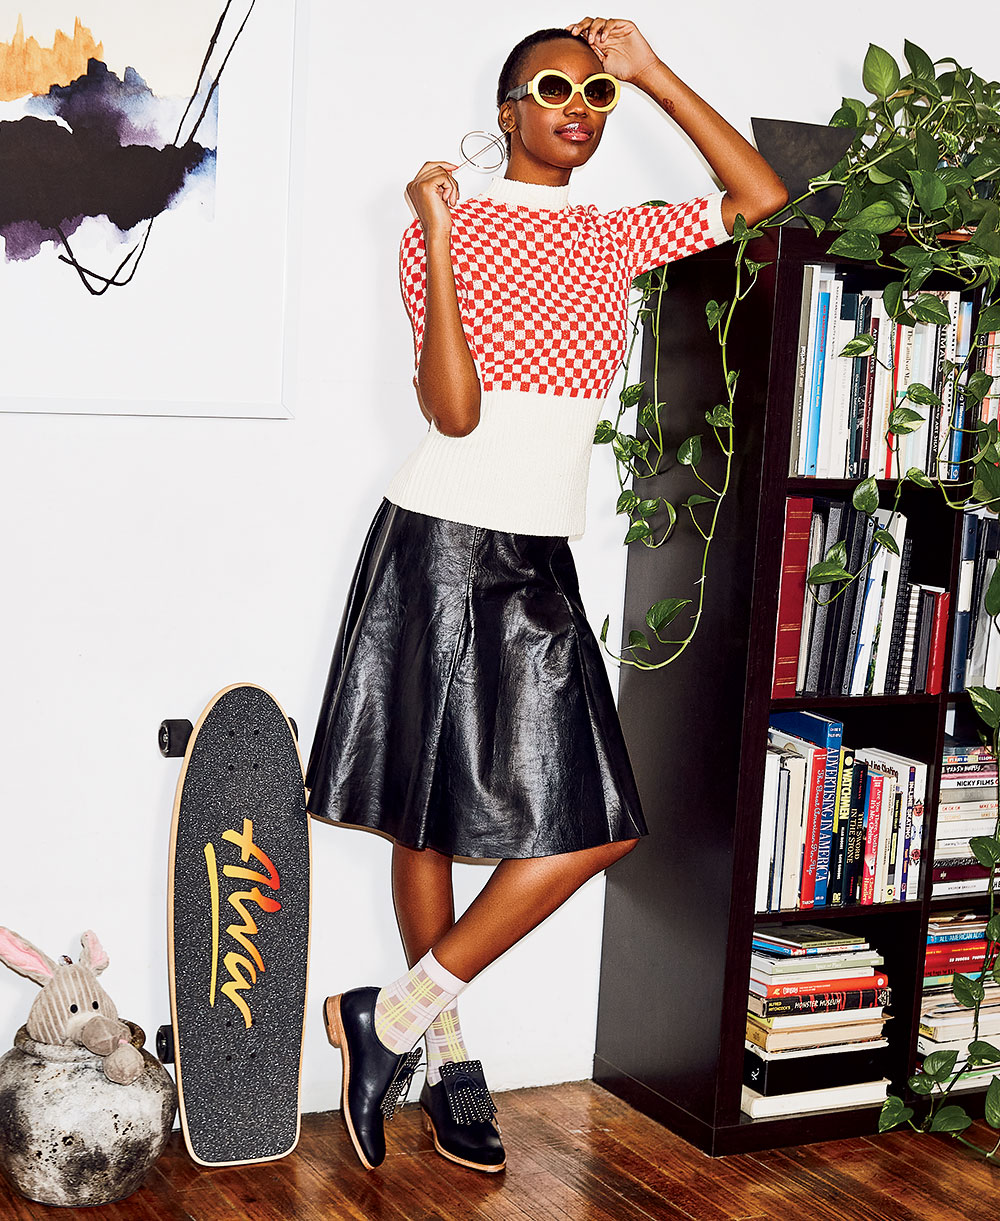 Sportmax cotton sweater and leather skirt, Histoire de Voir acetate and leather sunglasses, Studio SS earrings, Greta crew socks, and The Office of Angela Scott Ms. Jane leather oxfords